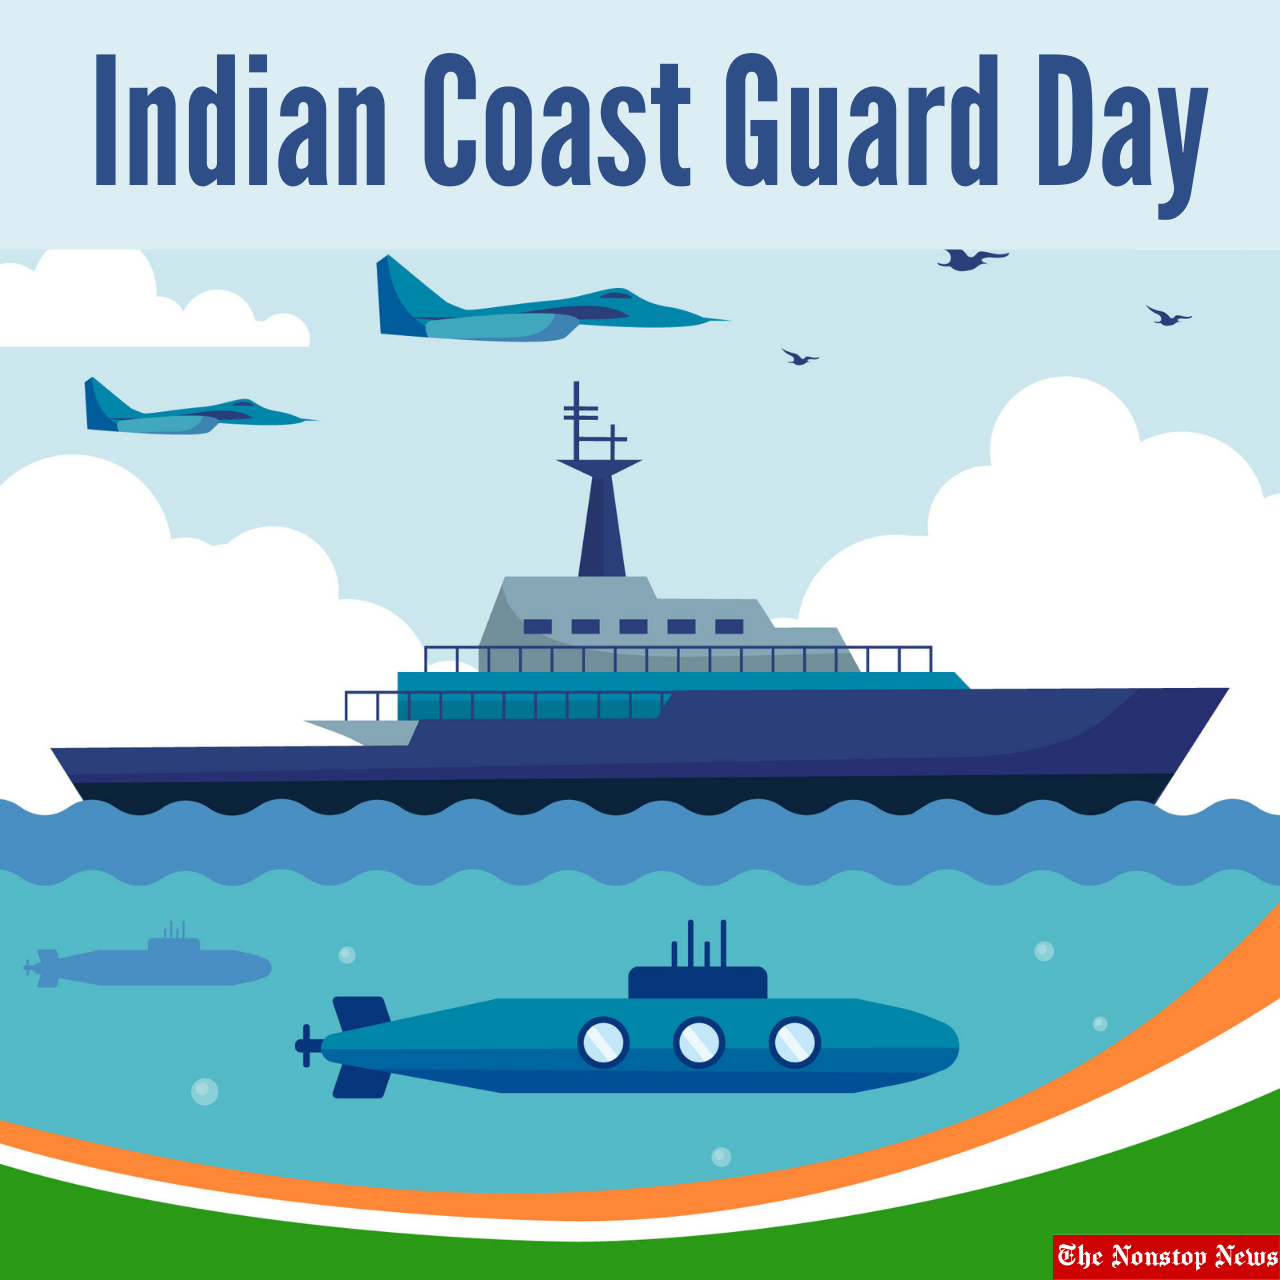 Indian Coast Guard Day 2022: Quotes, Wishes, HD Images, Slogans, Messages to Share